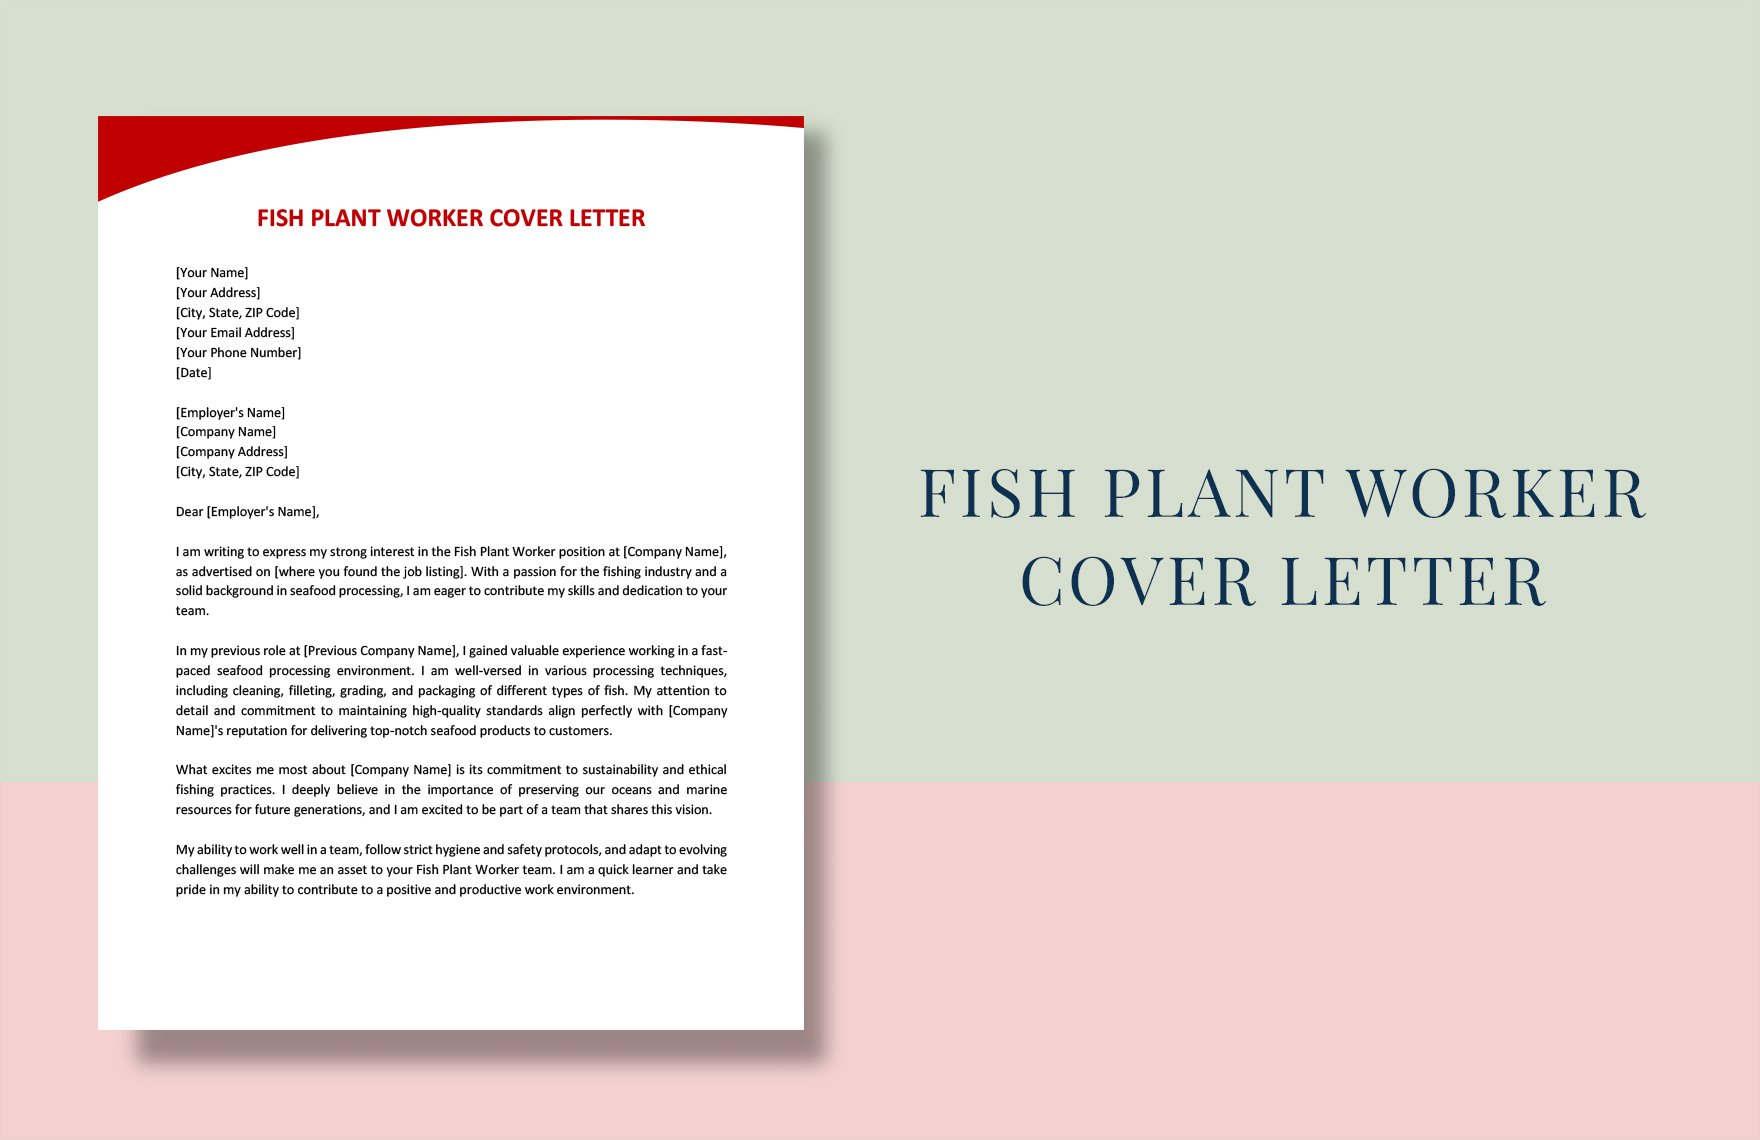 Fish Plant Worker Cover Letter in Word, Google Docs, PDF